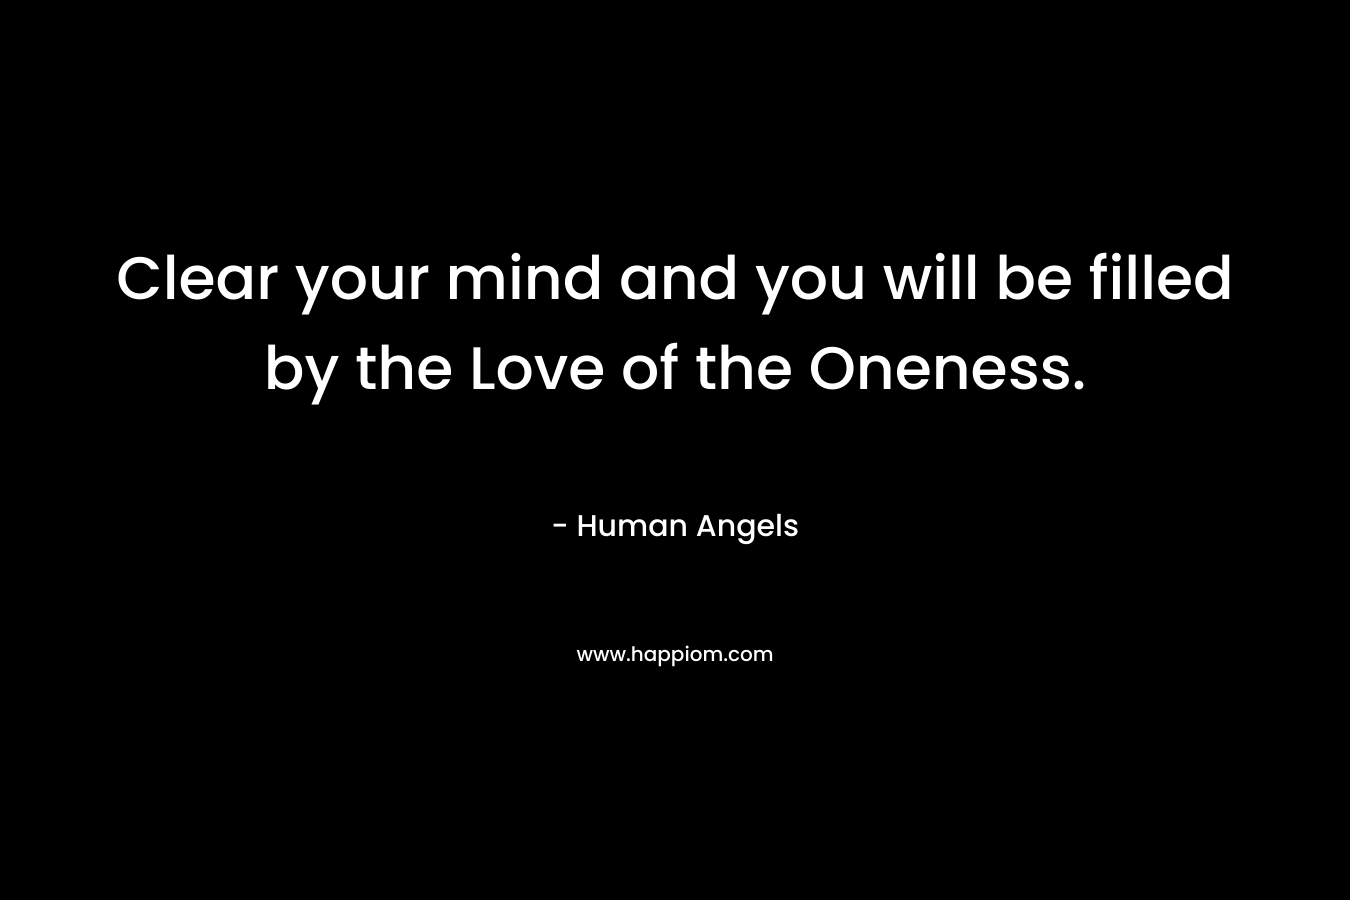 Clear your mind and you will be filled by the Love of the Oneness. – Human Angels